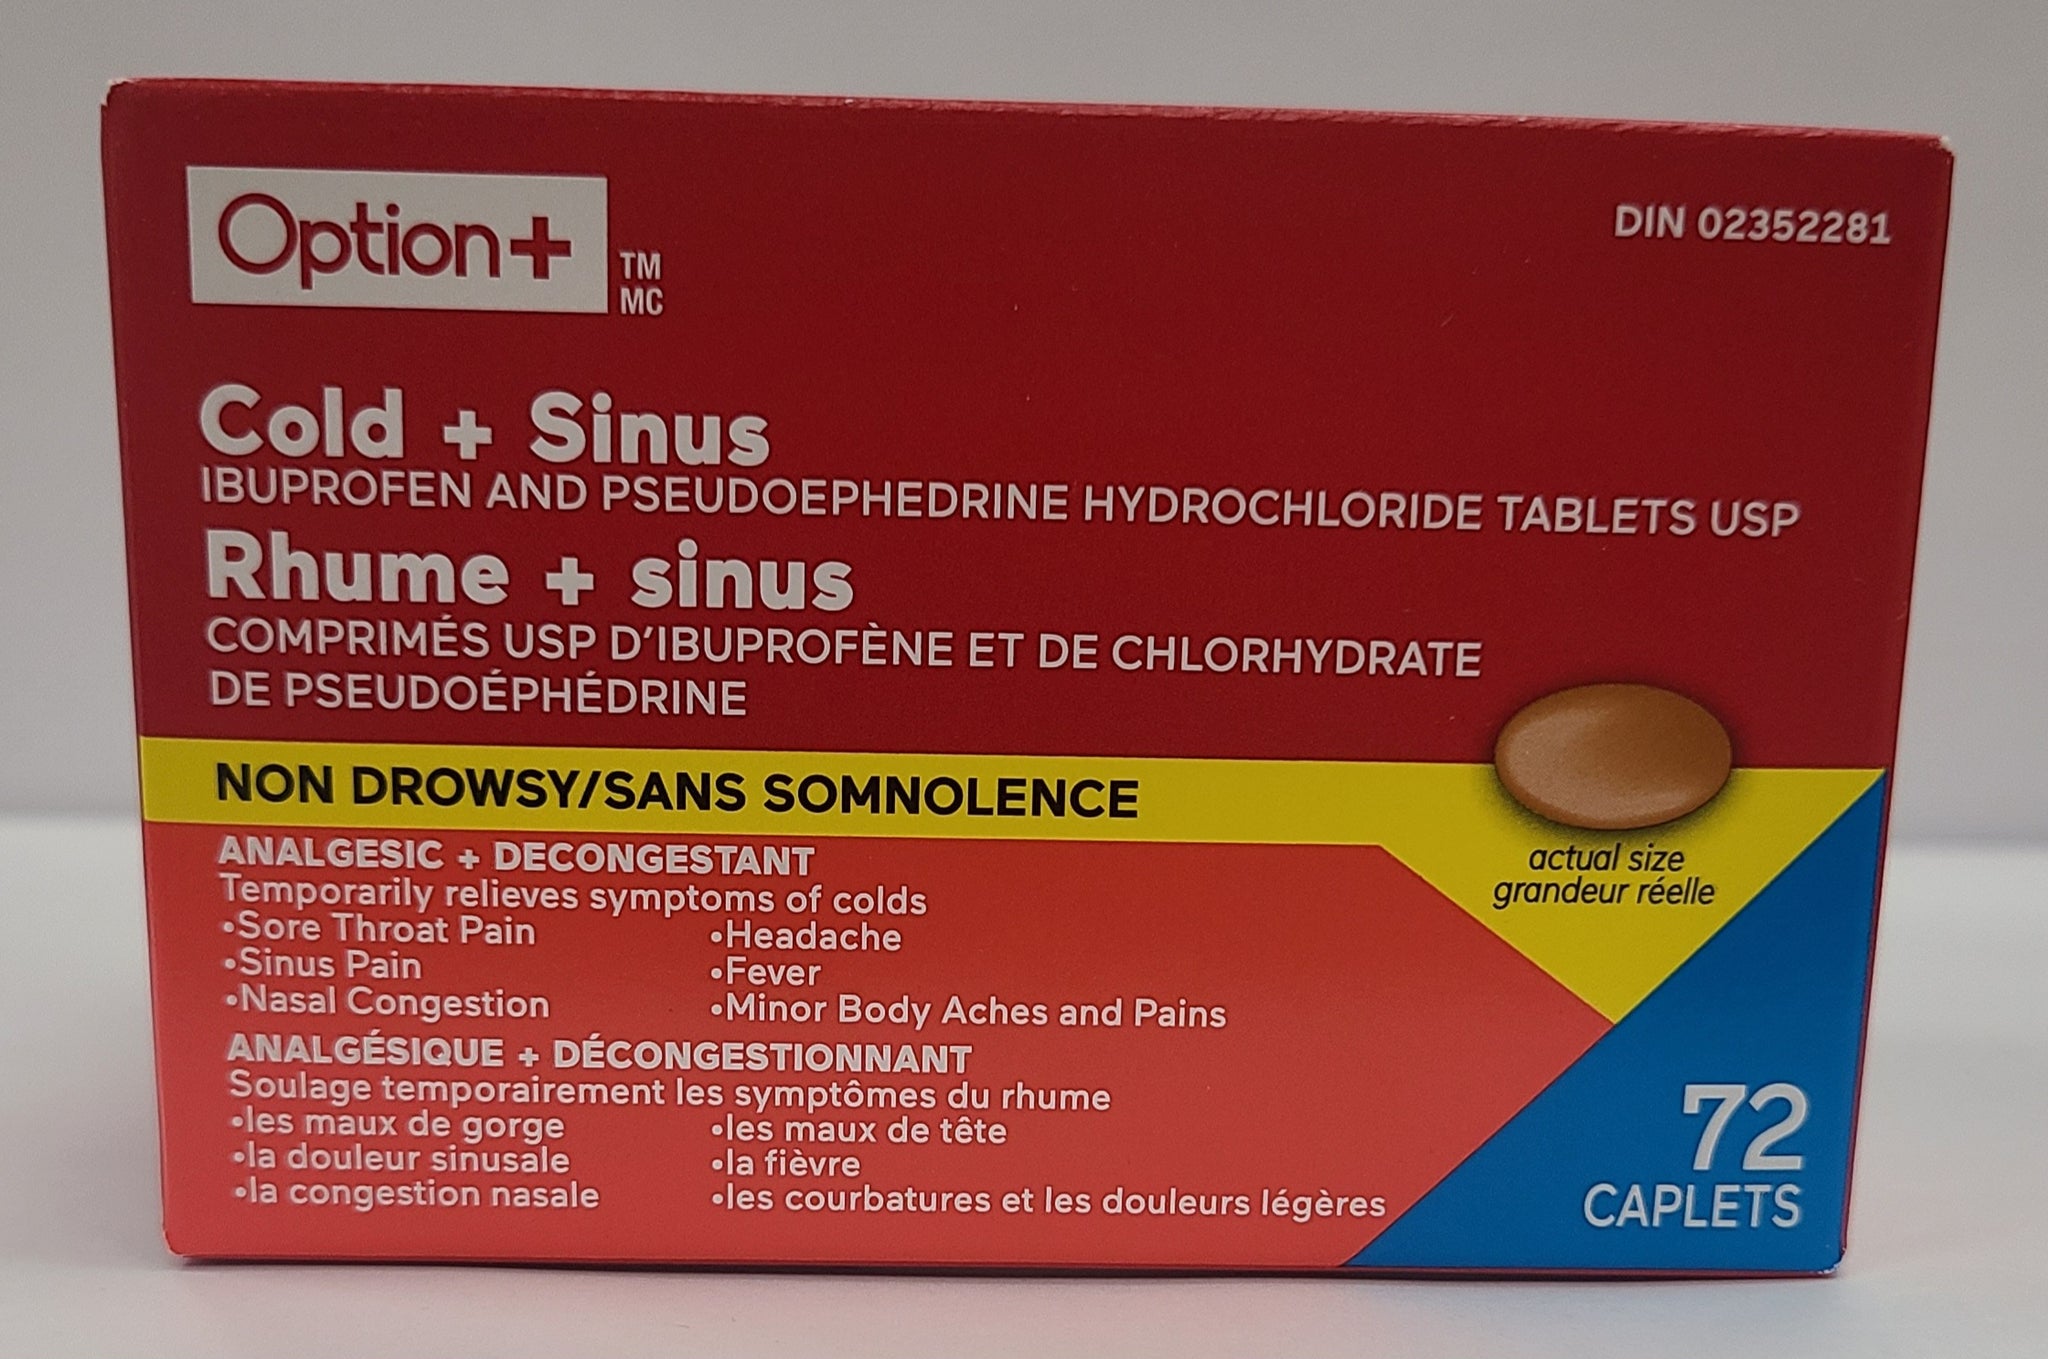 Option+ Cold and Sinus Ibuprofen and Pseudoephedrine Hydrochloride Tablets USP 72 Caplets